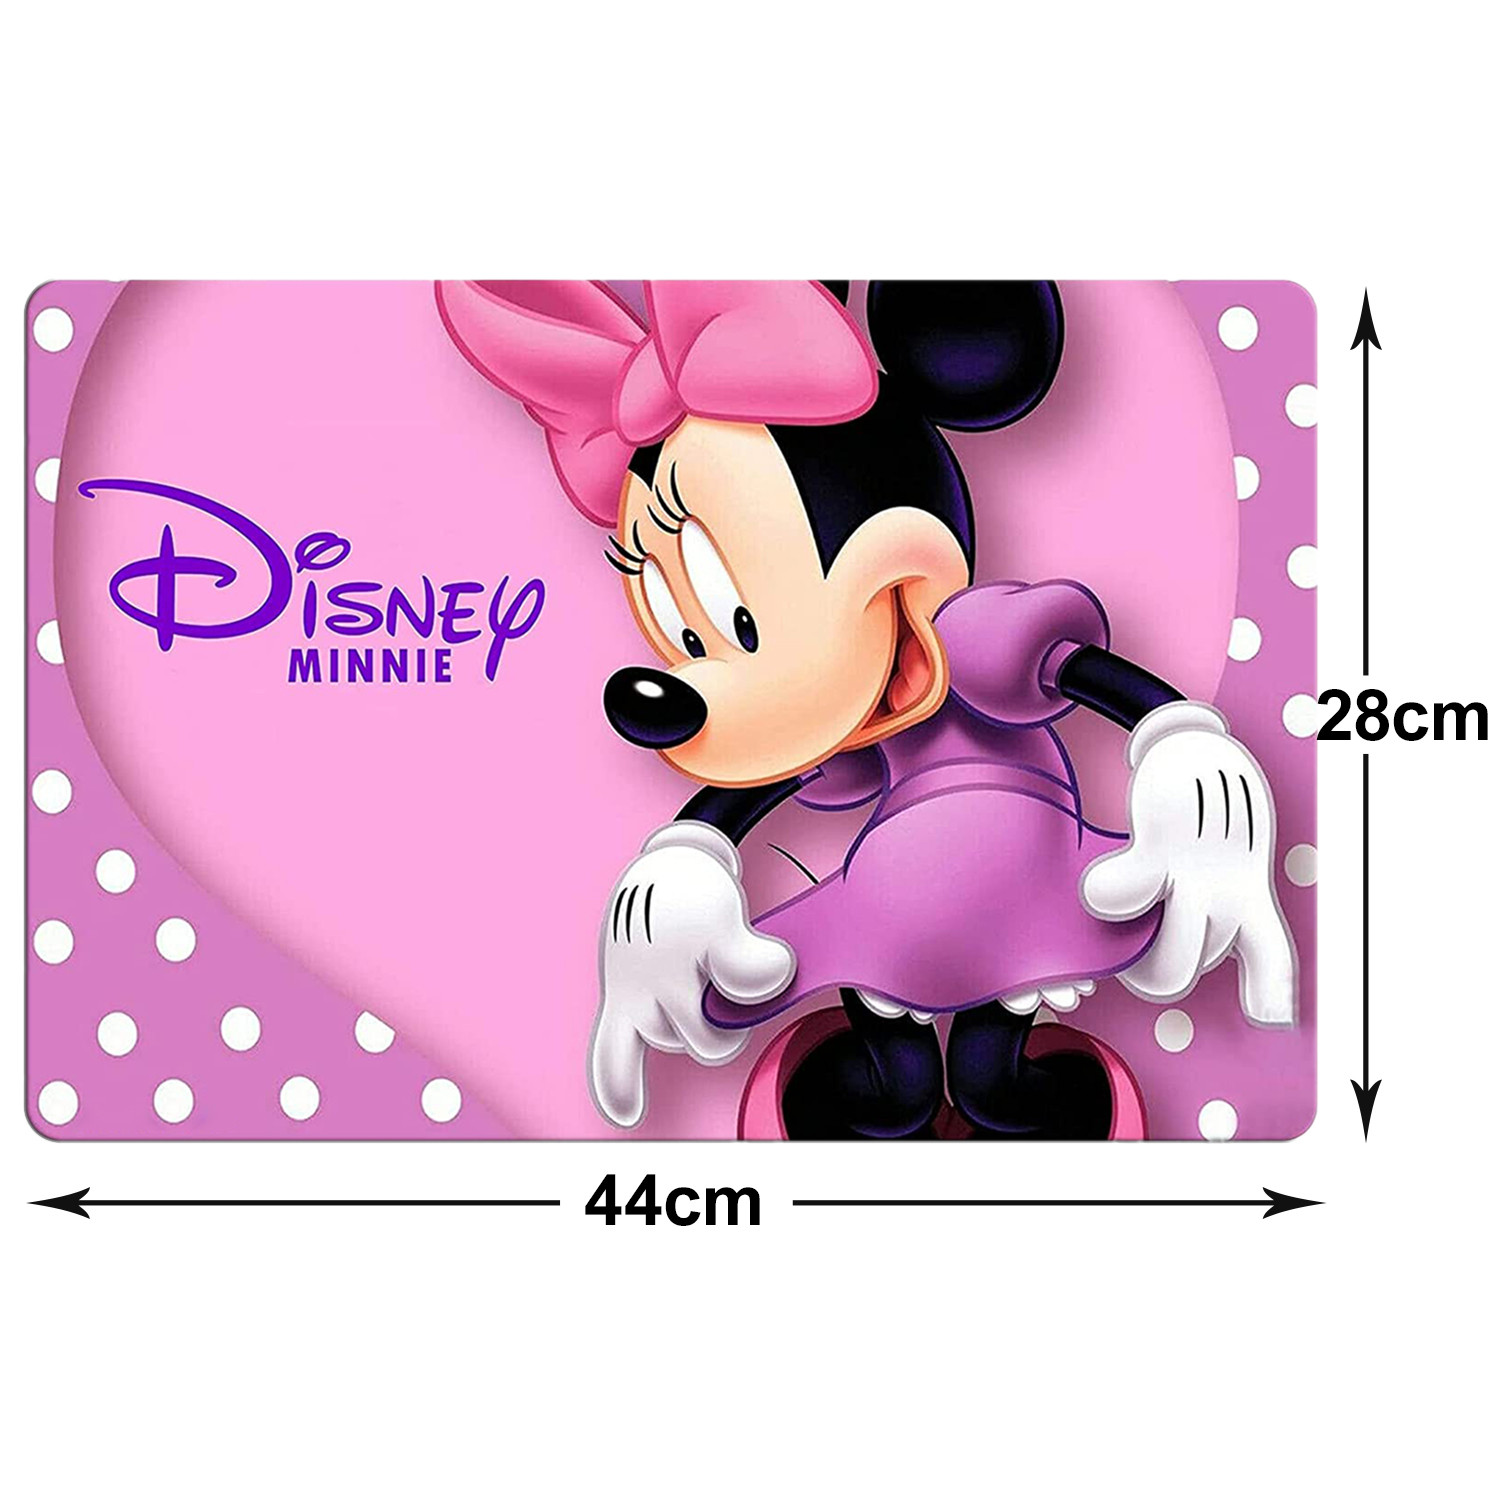 Kuber Industries Multiuses Minnie Print PVC Table Placemat With 6 Coasters for kitchen, Dining Table Set of 6 (Pink)